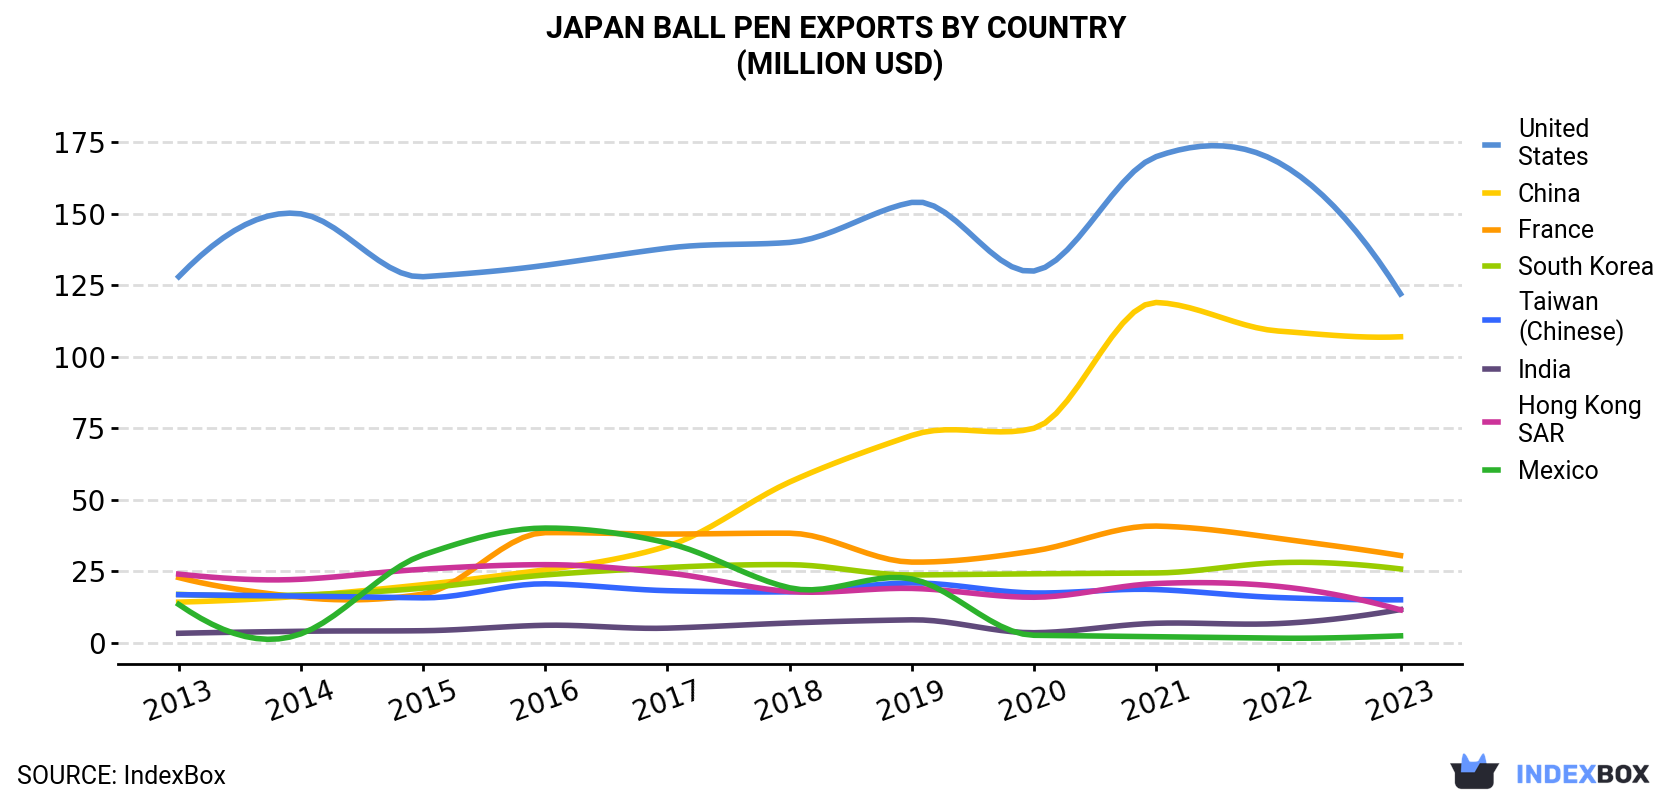 Japan Ball Pen Exports By Country (Million USD)